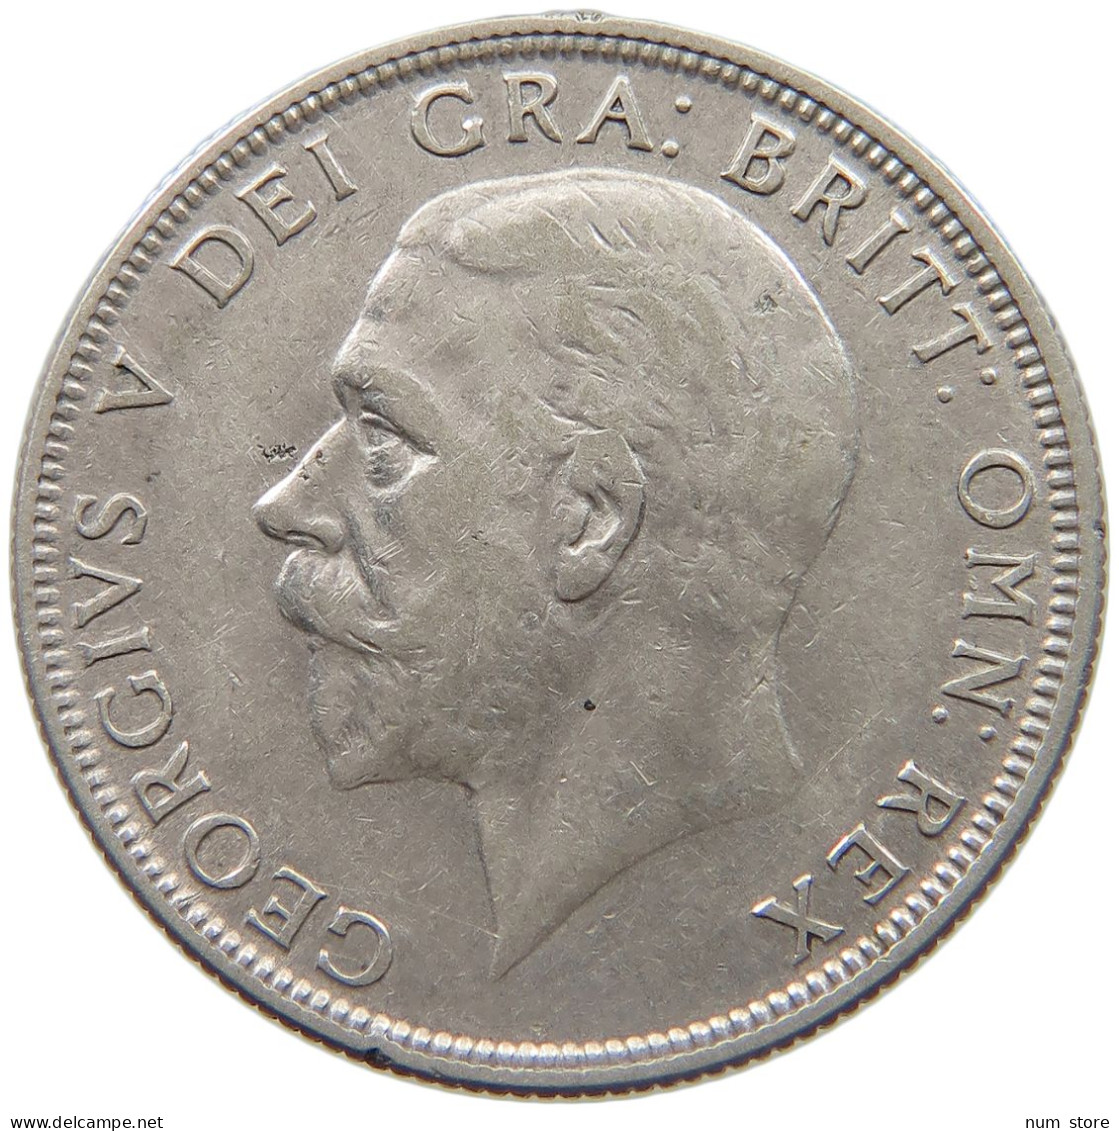 GREAT BRITAIN FLORIN 1935 GEORGE V. (1910-1936) #MA 023345 - J. 1 Florin / 2 Schillings